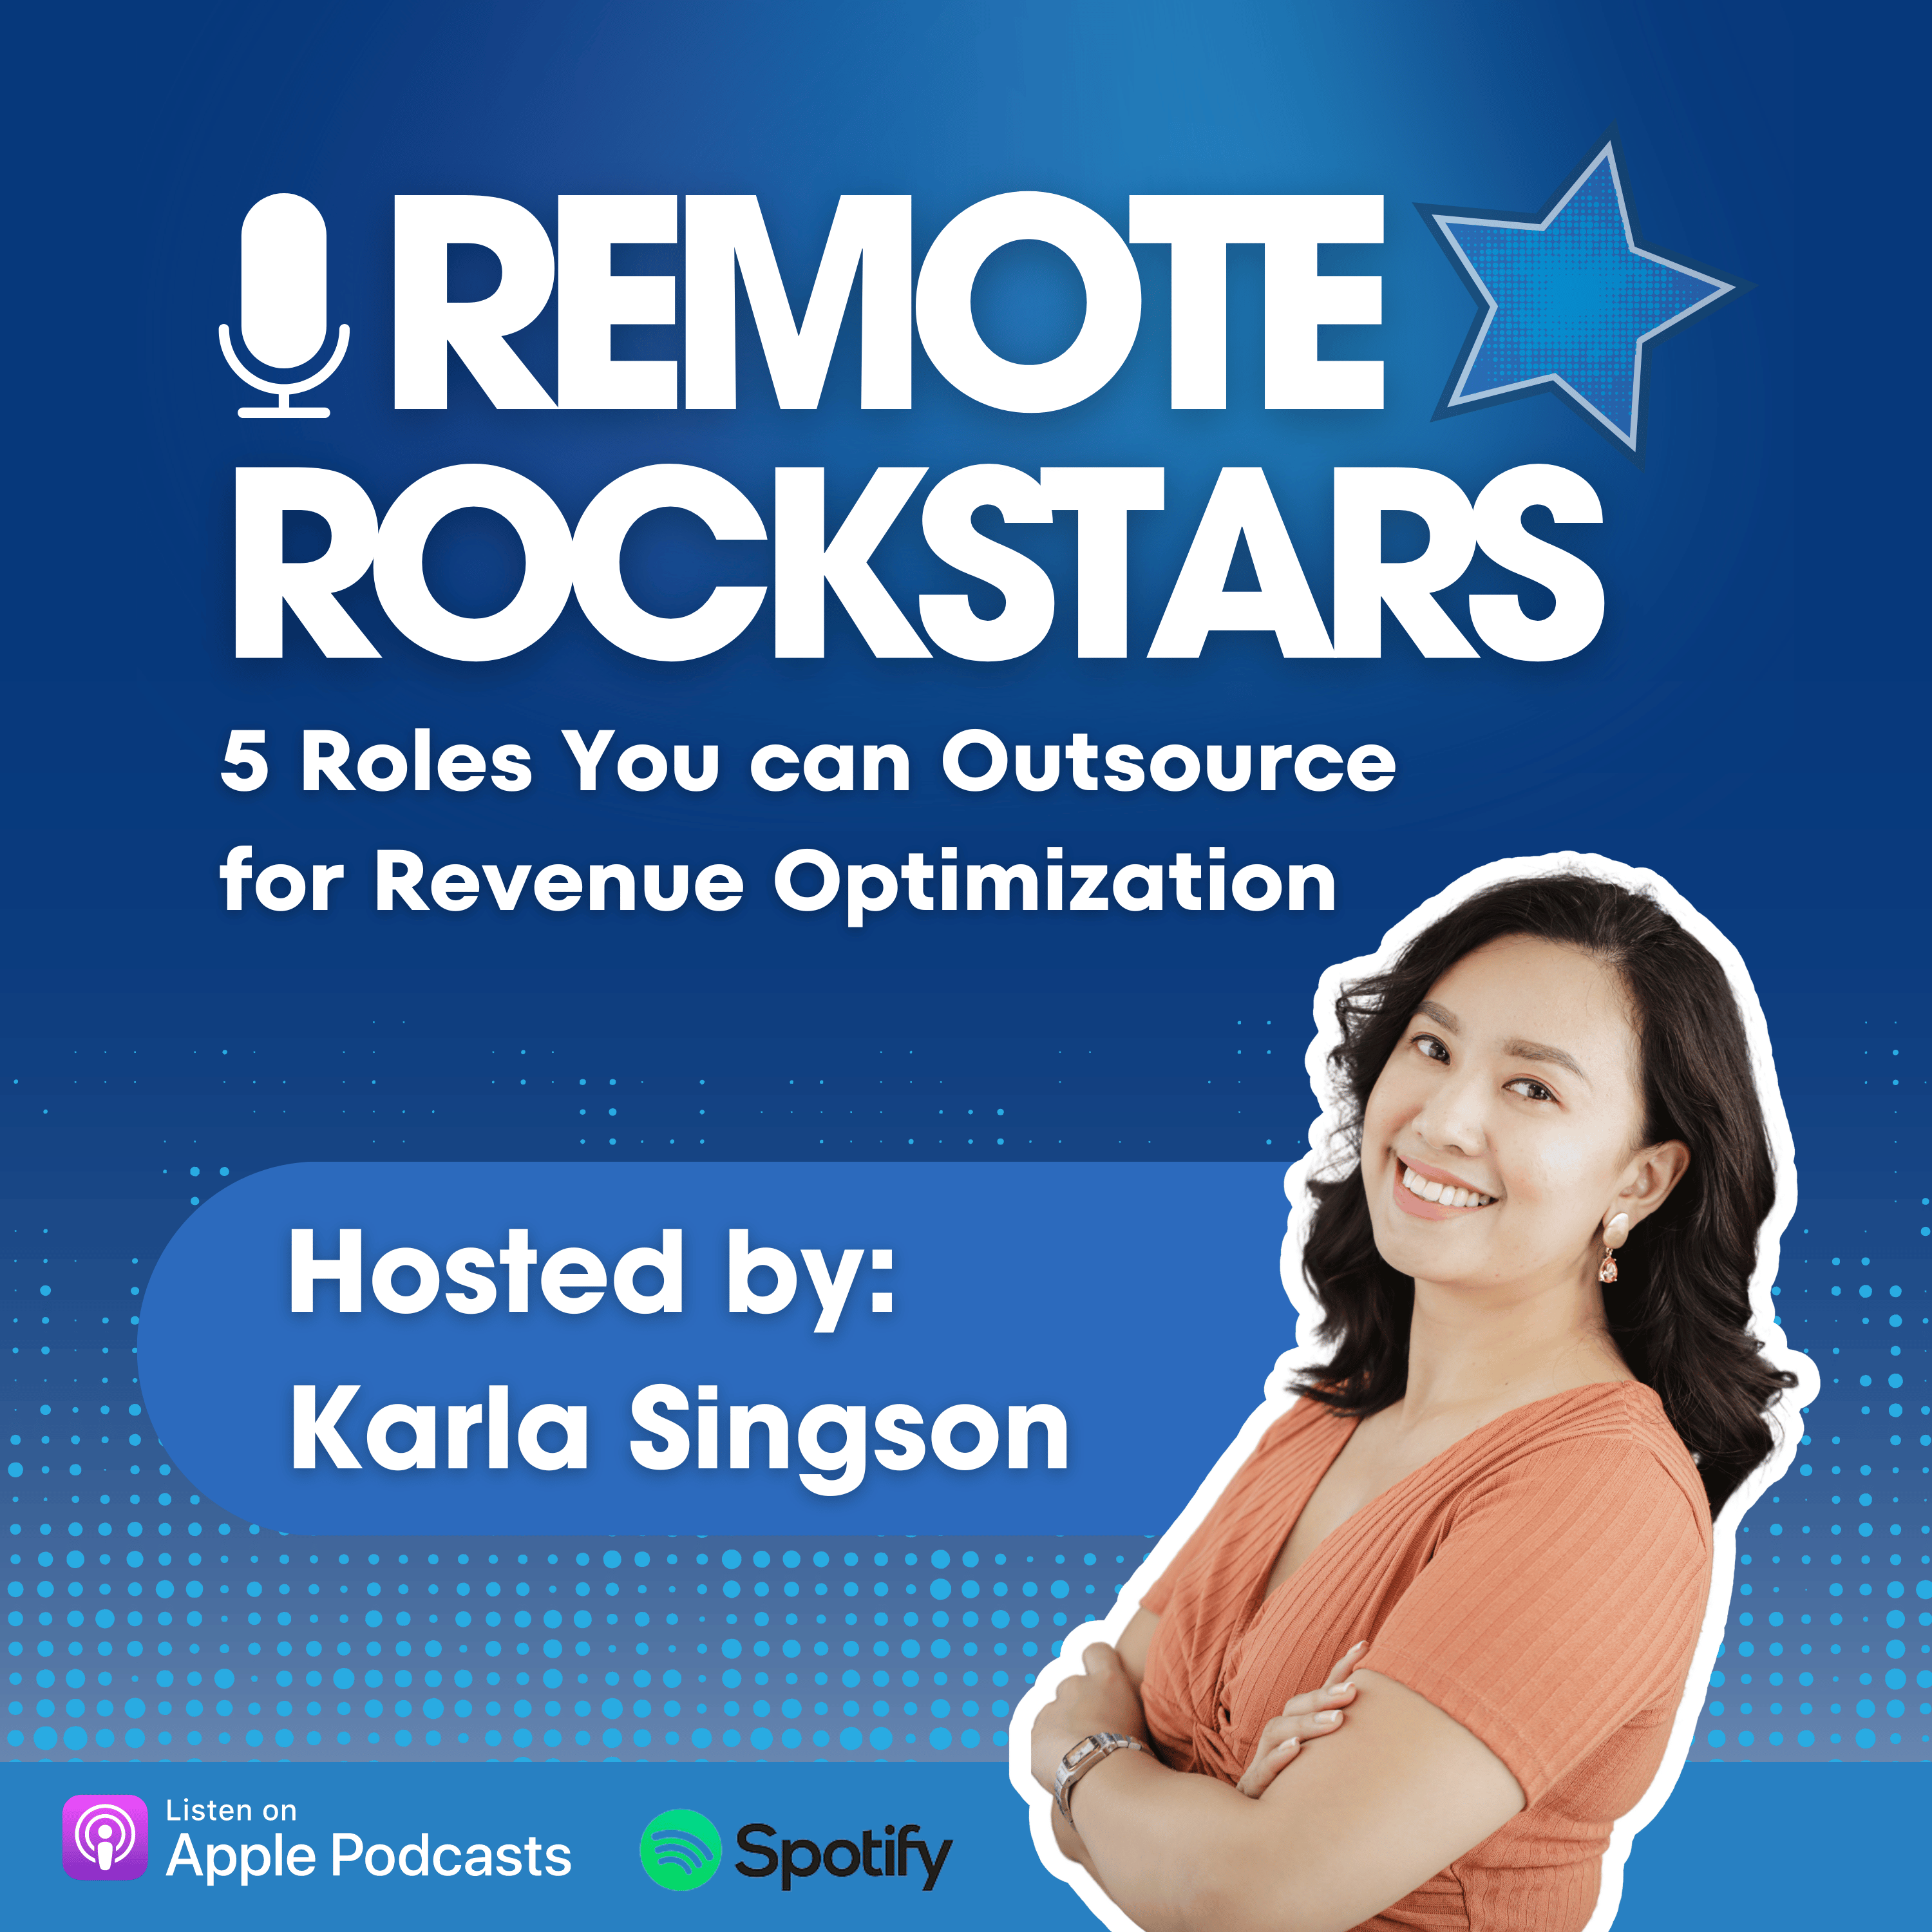 5 Roles You can Outsource for Revenue Optimization